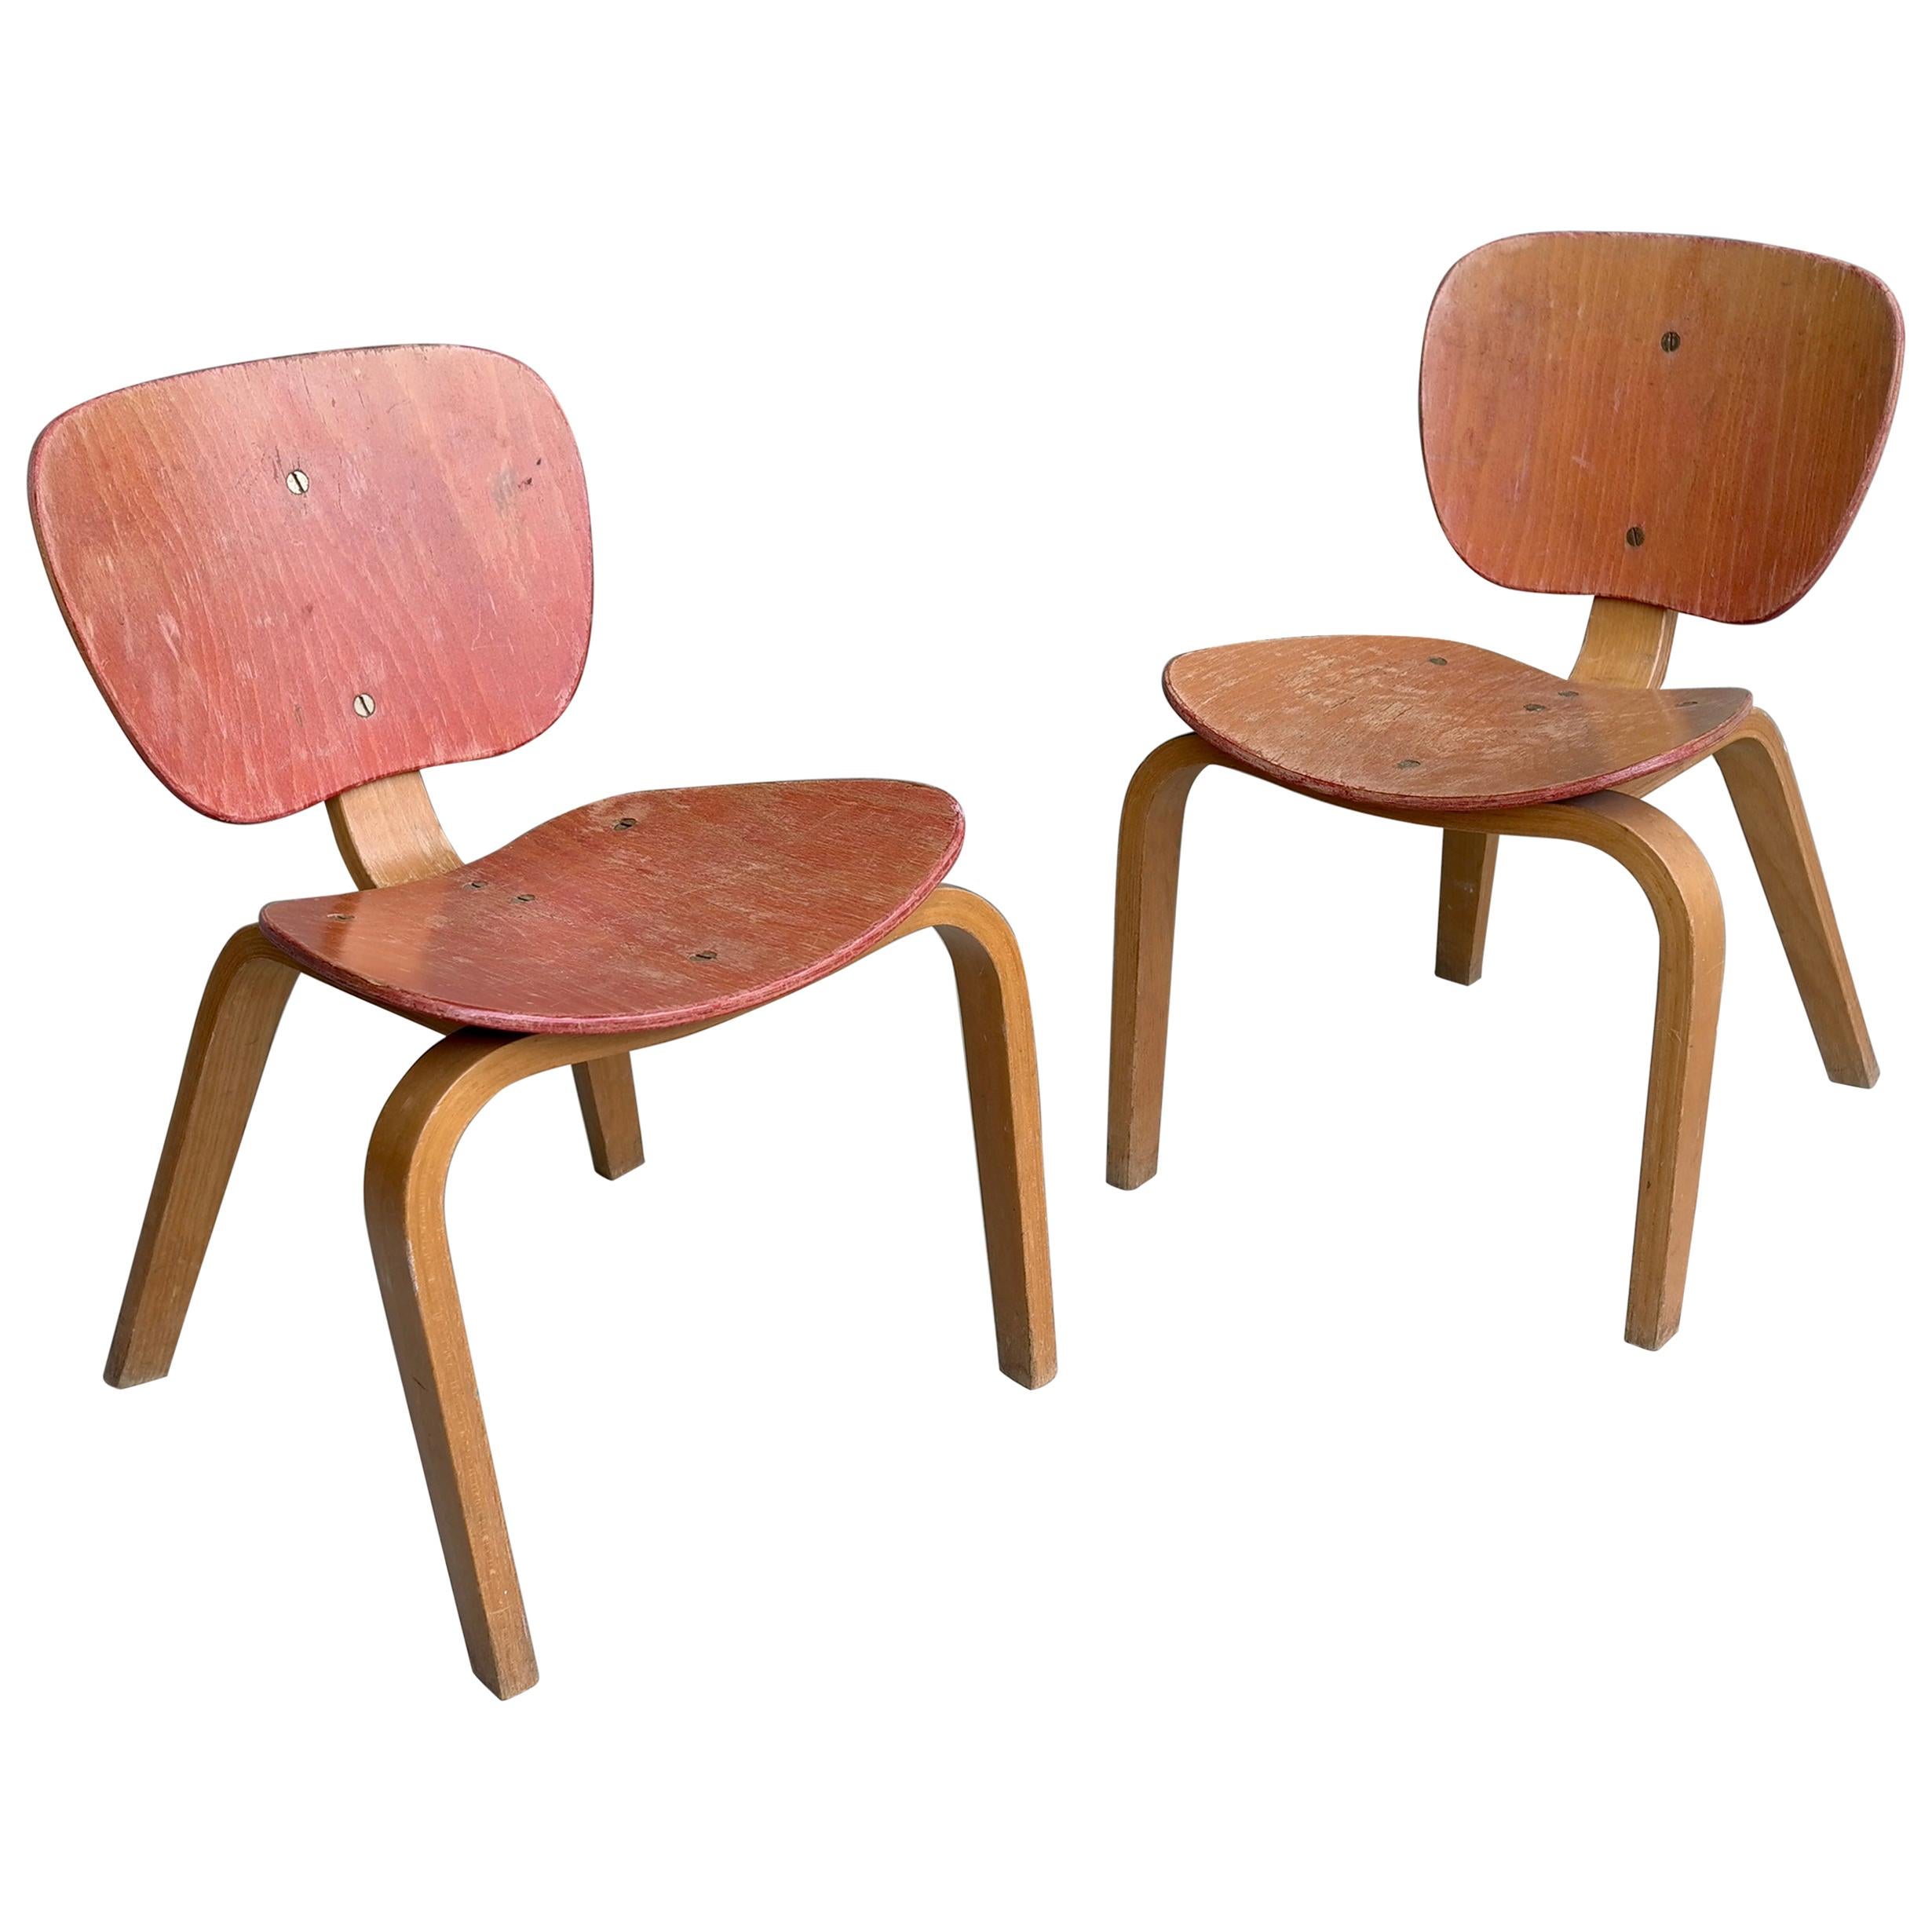 Pair of Midcentury Children Chairs in Bent Plywood, Germany, 1950s For Sale